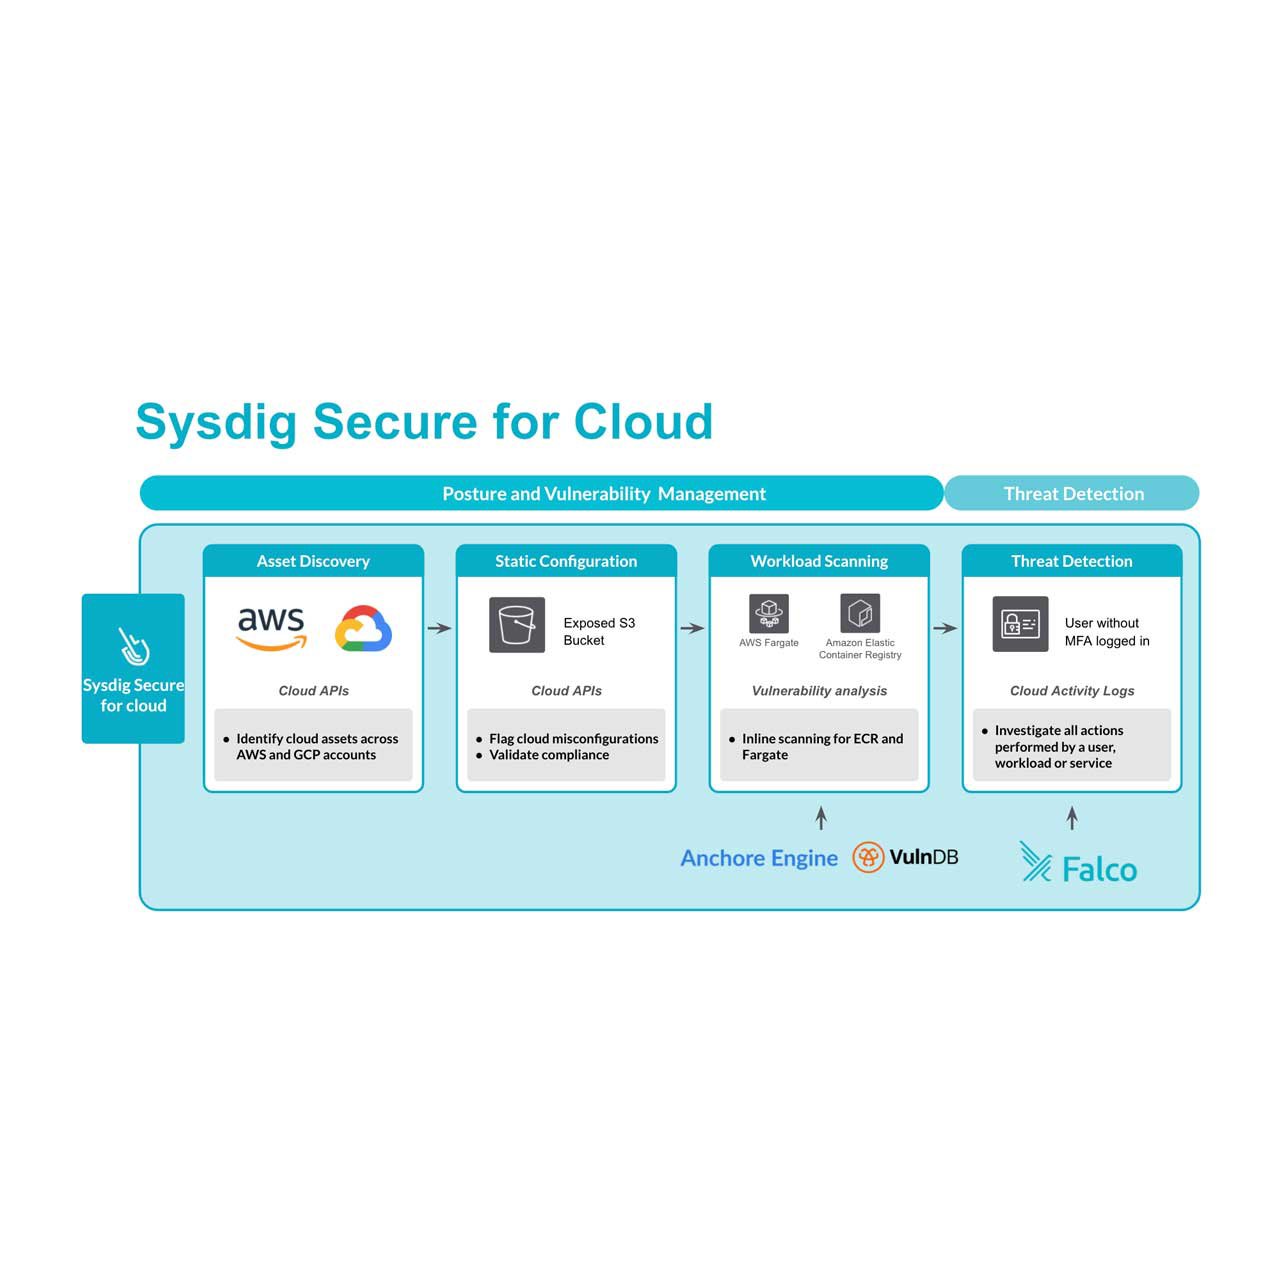 Sysdig Secure for cloud